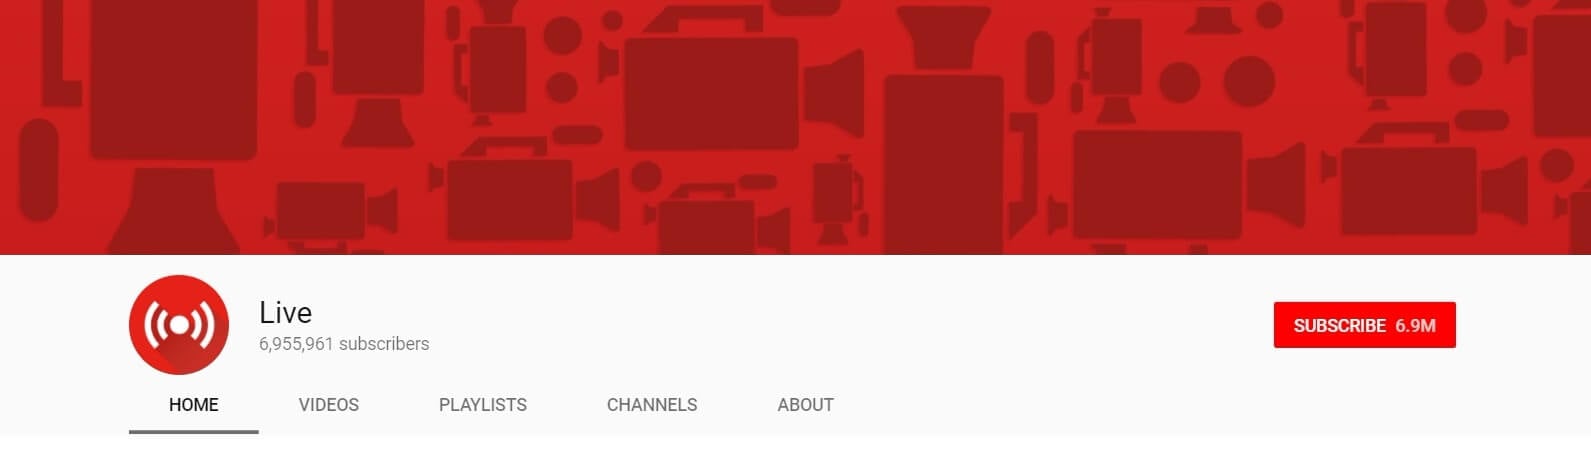 The YouTube Live homepage